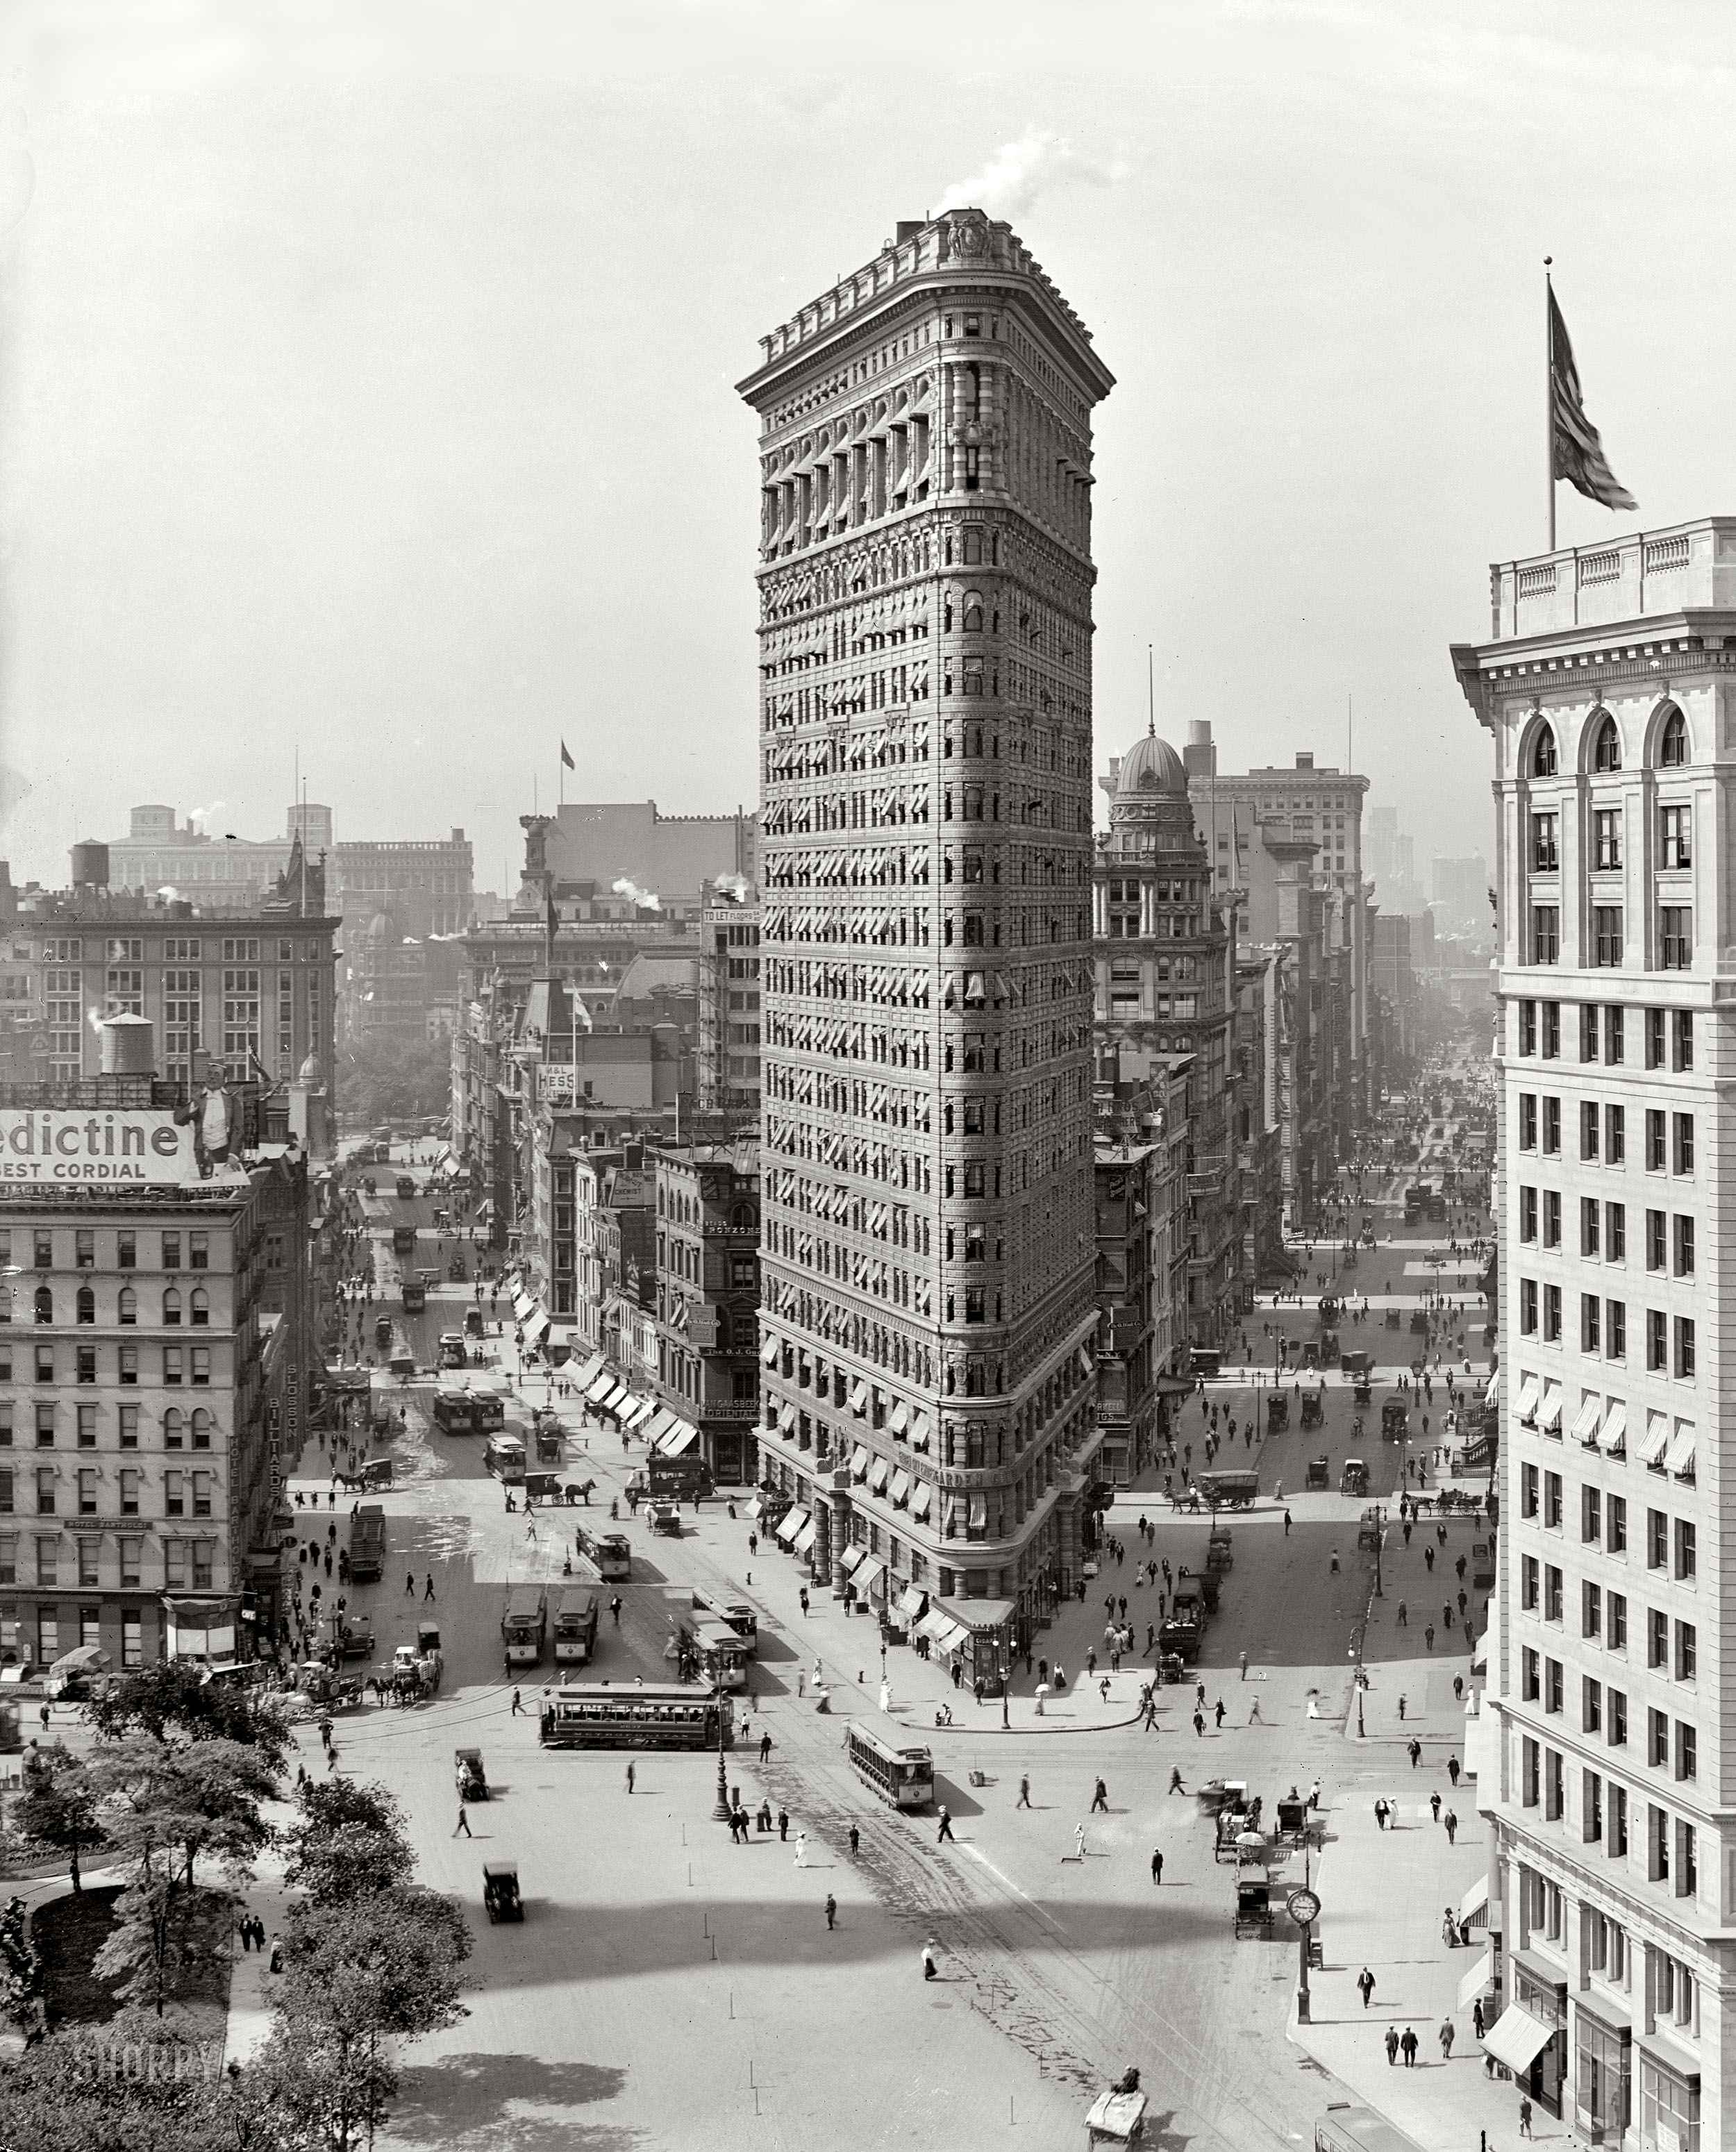 New York circa 1909. "Panorama of Madison Square." This glass plate, part of a nine-exposure panorama, affords yet another view of that enduring architectural icon, the Flatiron Building. 8x10 dry-plate glass negative. View full size.